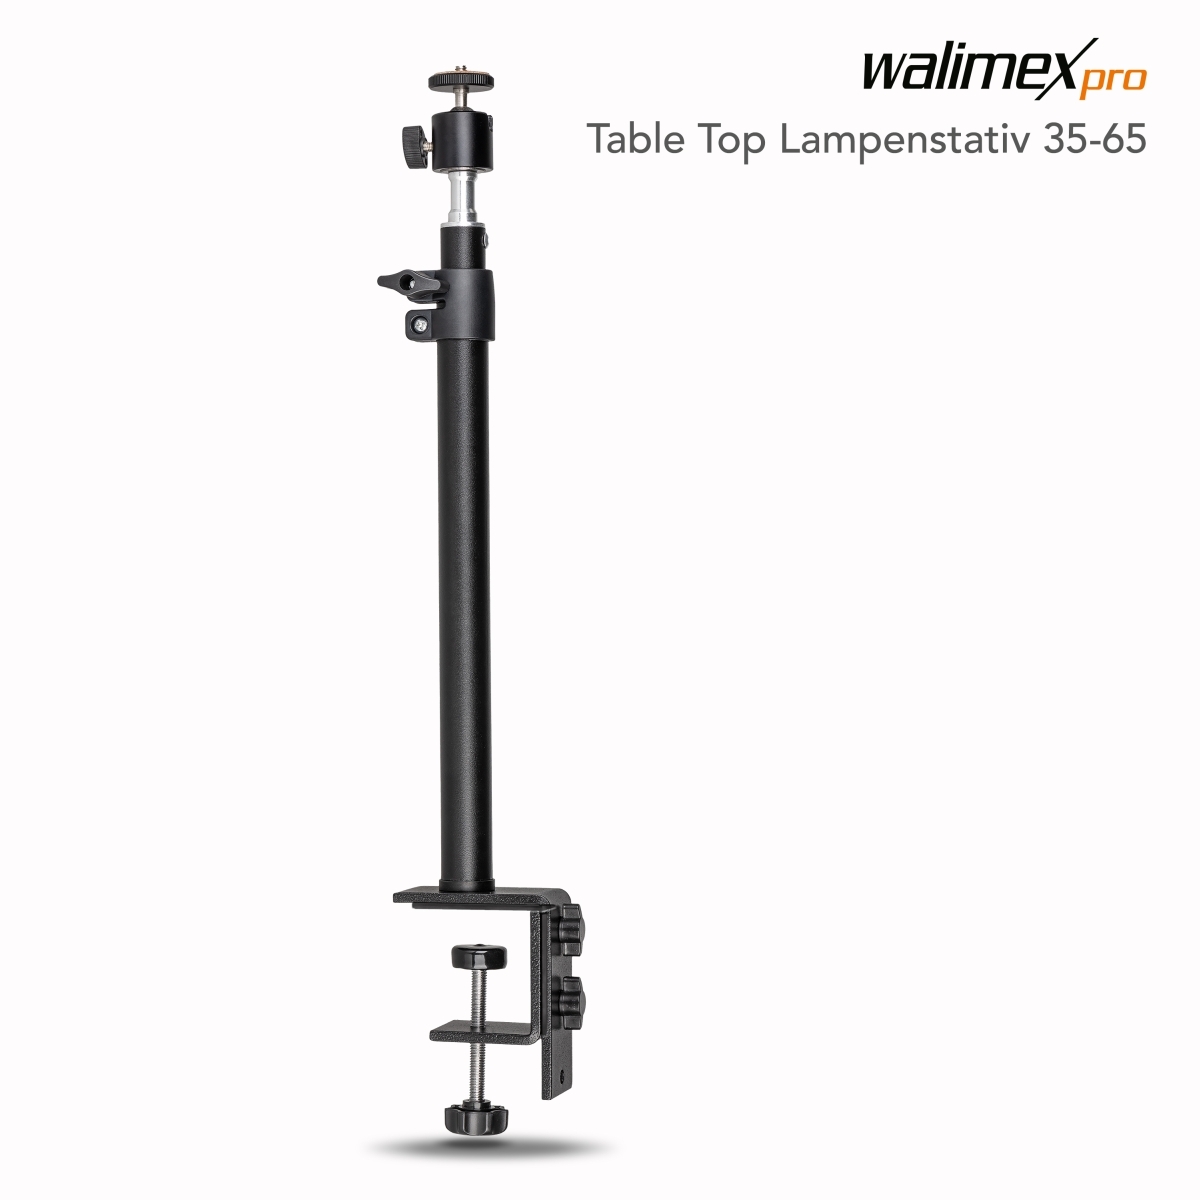 Walimex pro Table Top Lampenstativ 35-65